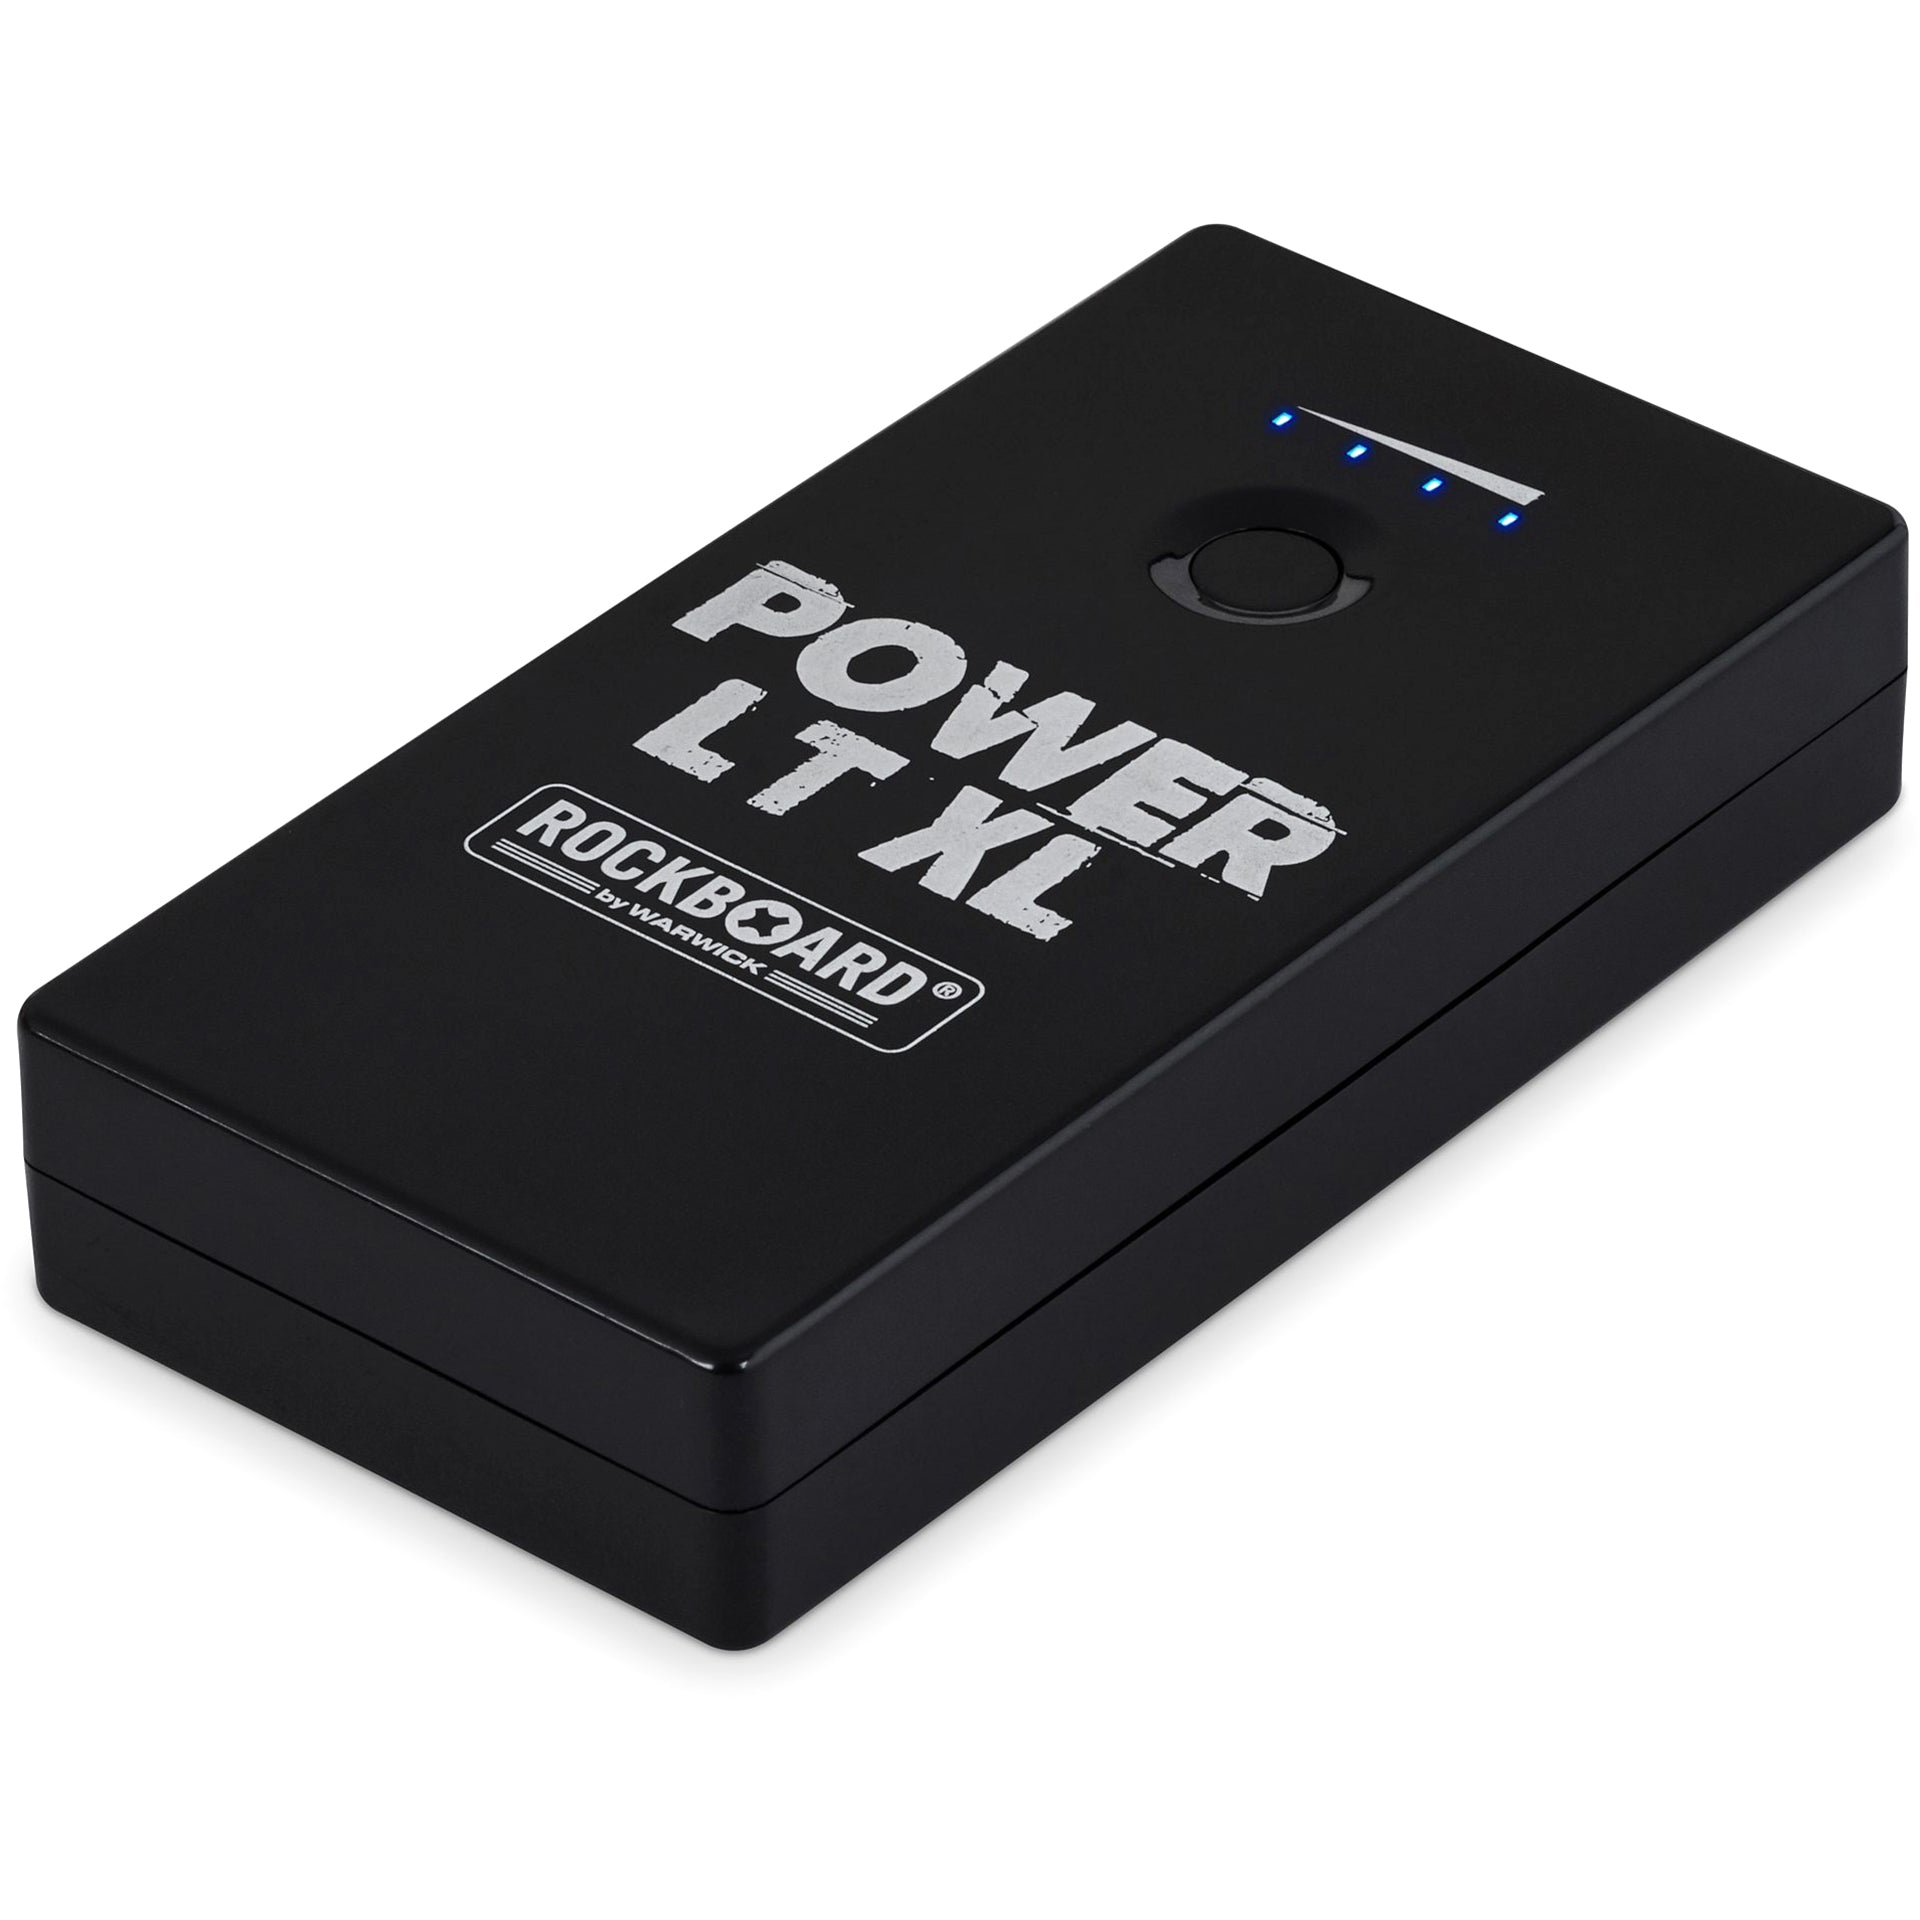 Rockboard Power LT XL in Black 2000 Ma Rechargeable Lithium Ion